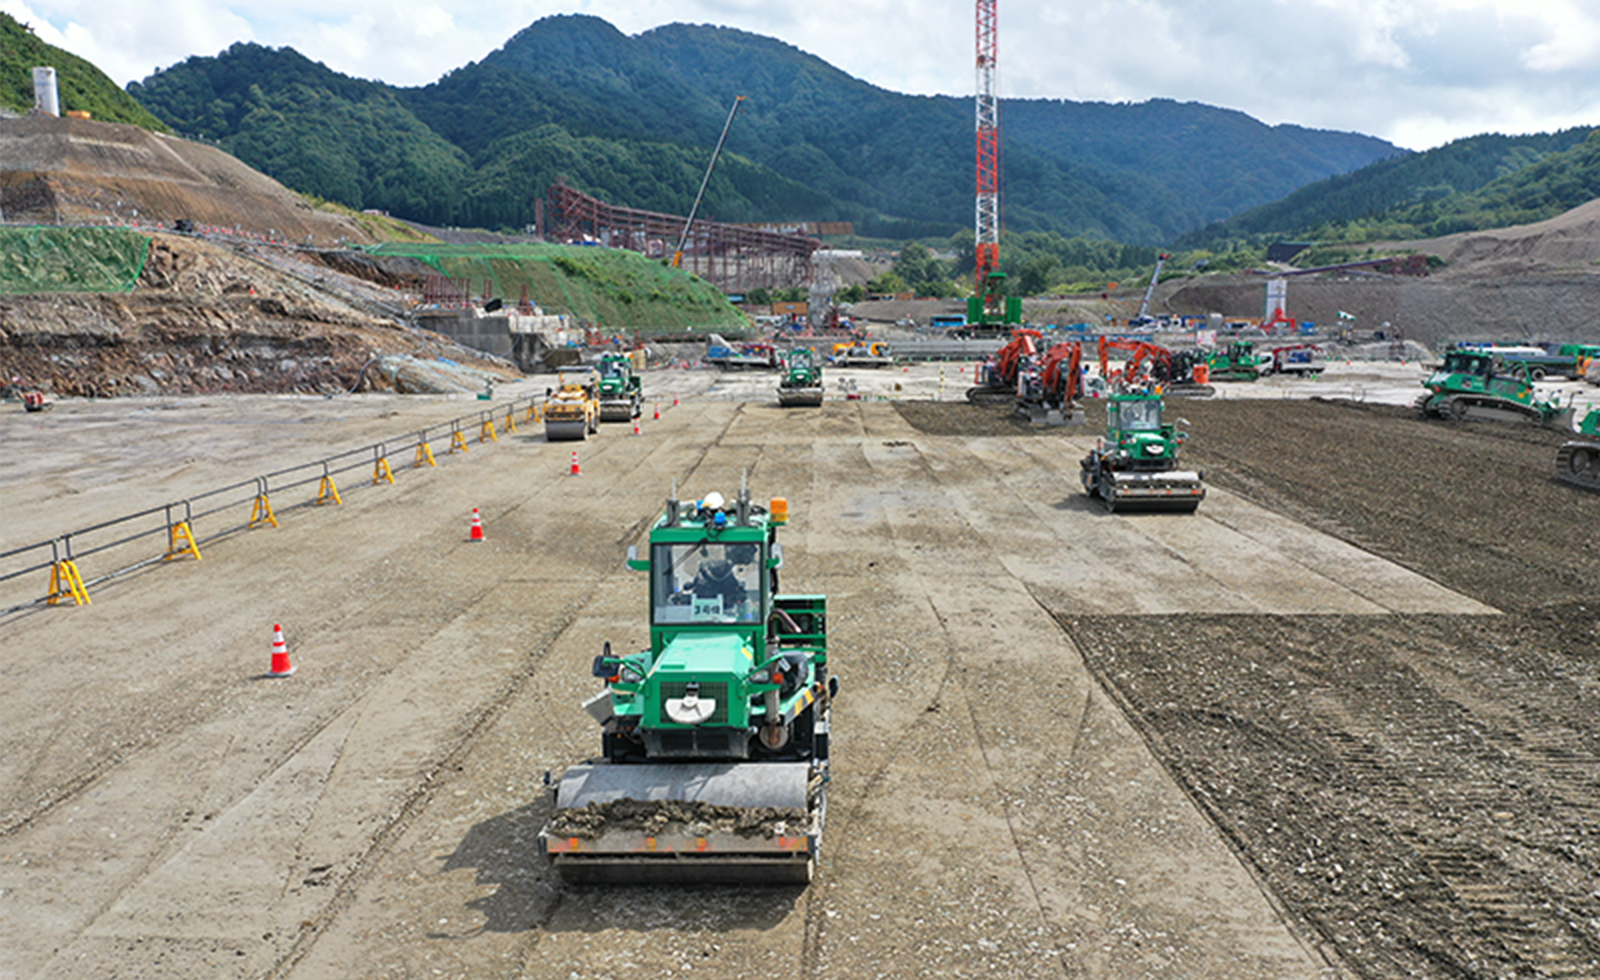 Unmanned automated construction machinery constructs the dam with maximum efficiency